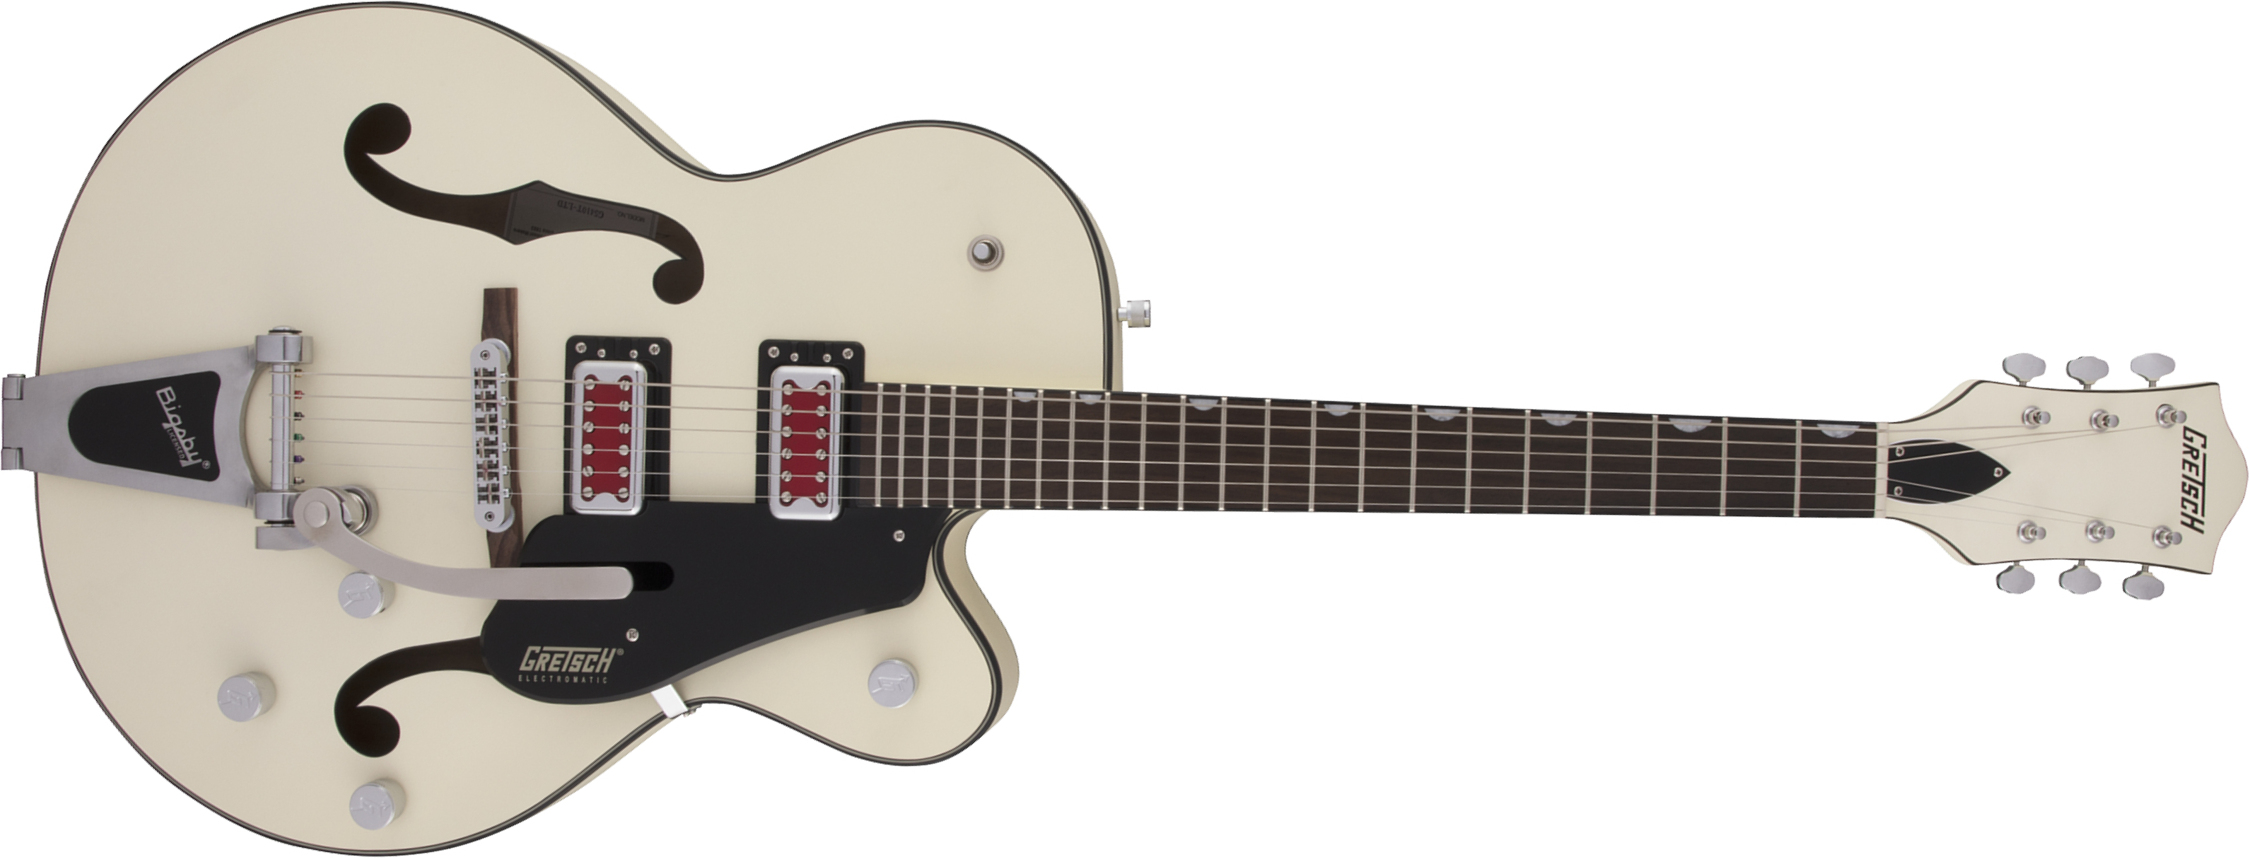 Gretsch G5410t Rat Rod Bigsby Electromatic Hollow Body 2h Trem Rw - Matte Vintage White - Semi-hollow electric guitar - Main picture